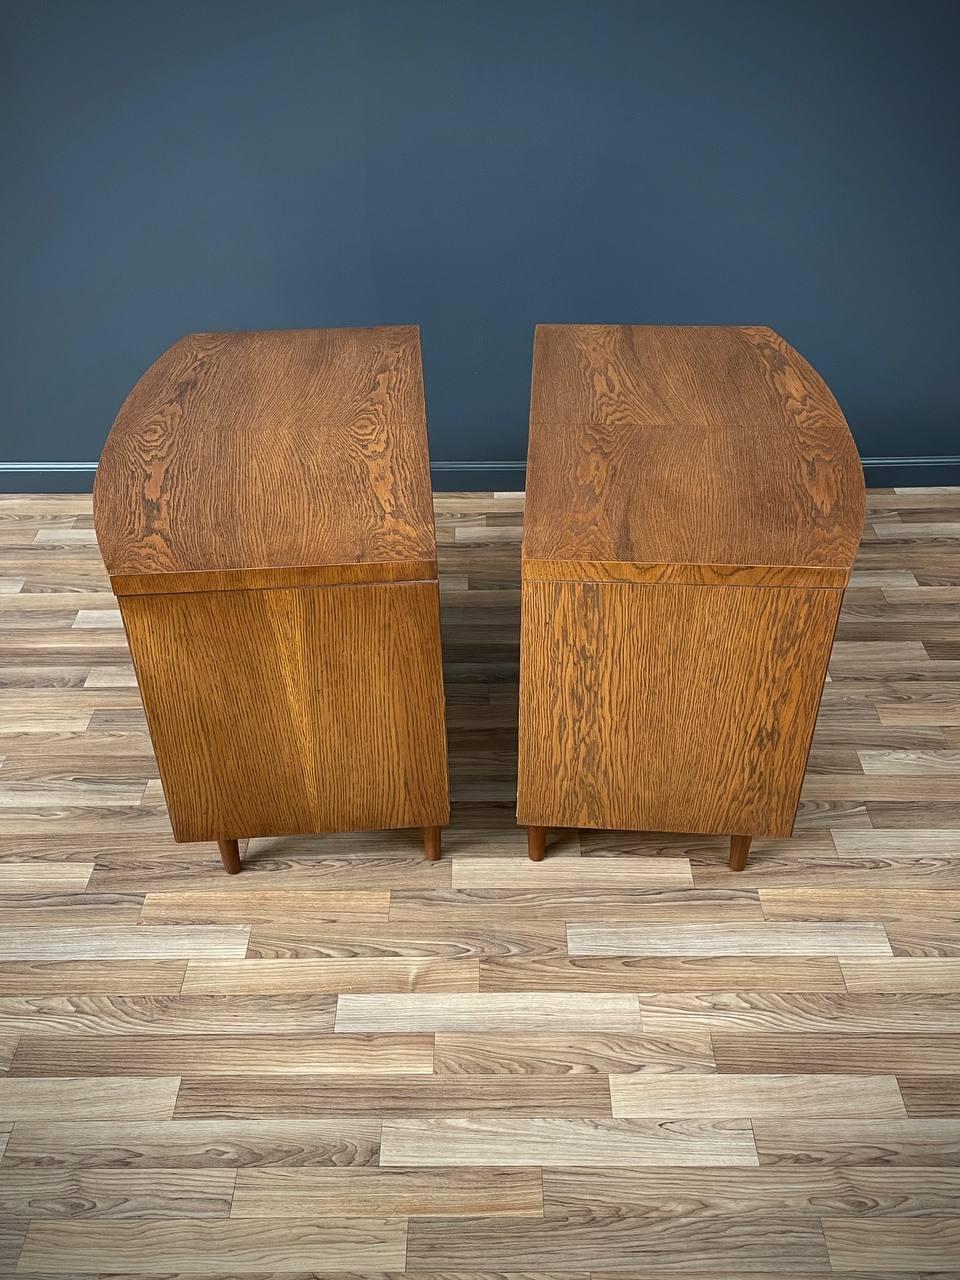 Newly Refinished - Pair of Mid-Century Modern Brutalist Night Stands by Lane 2